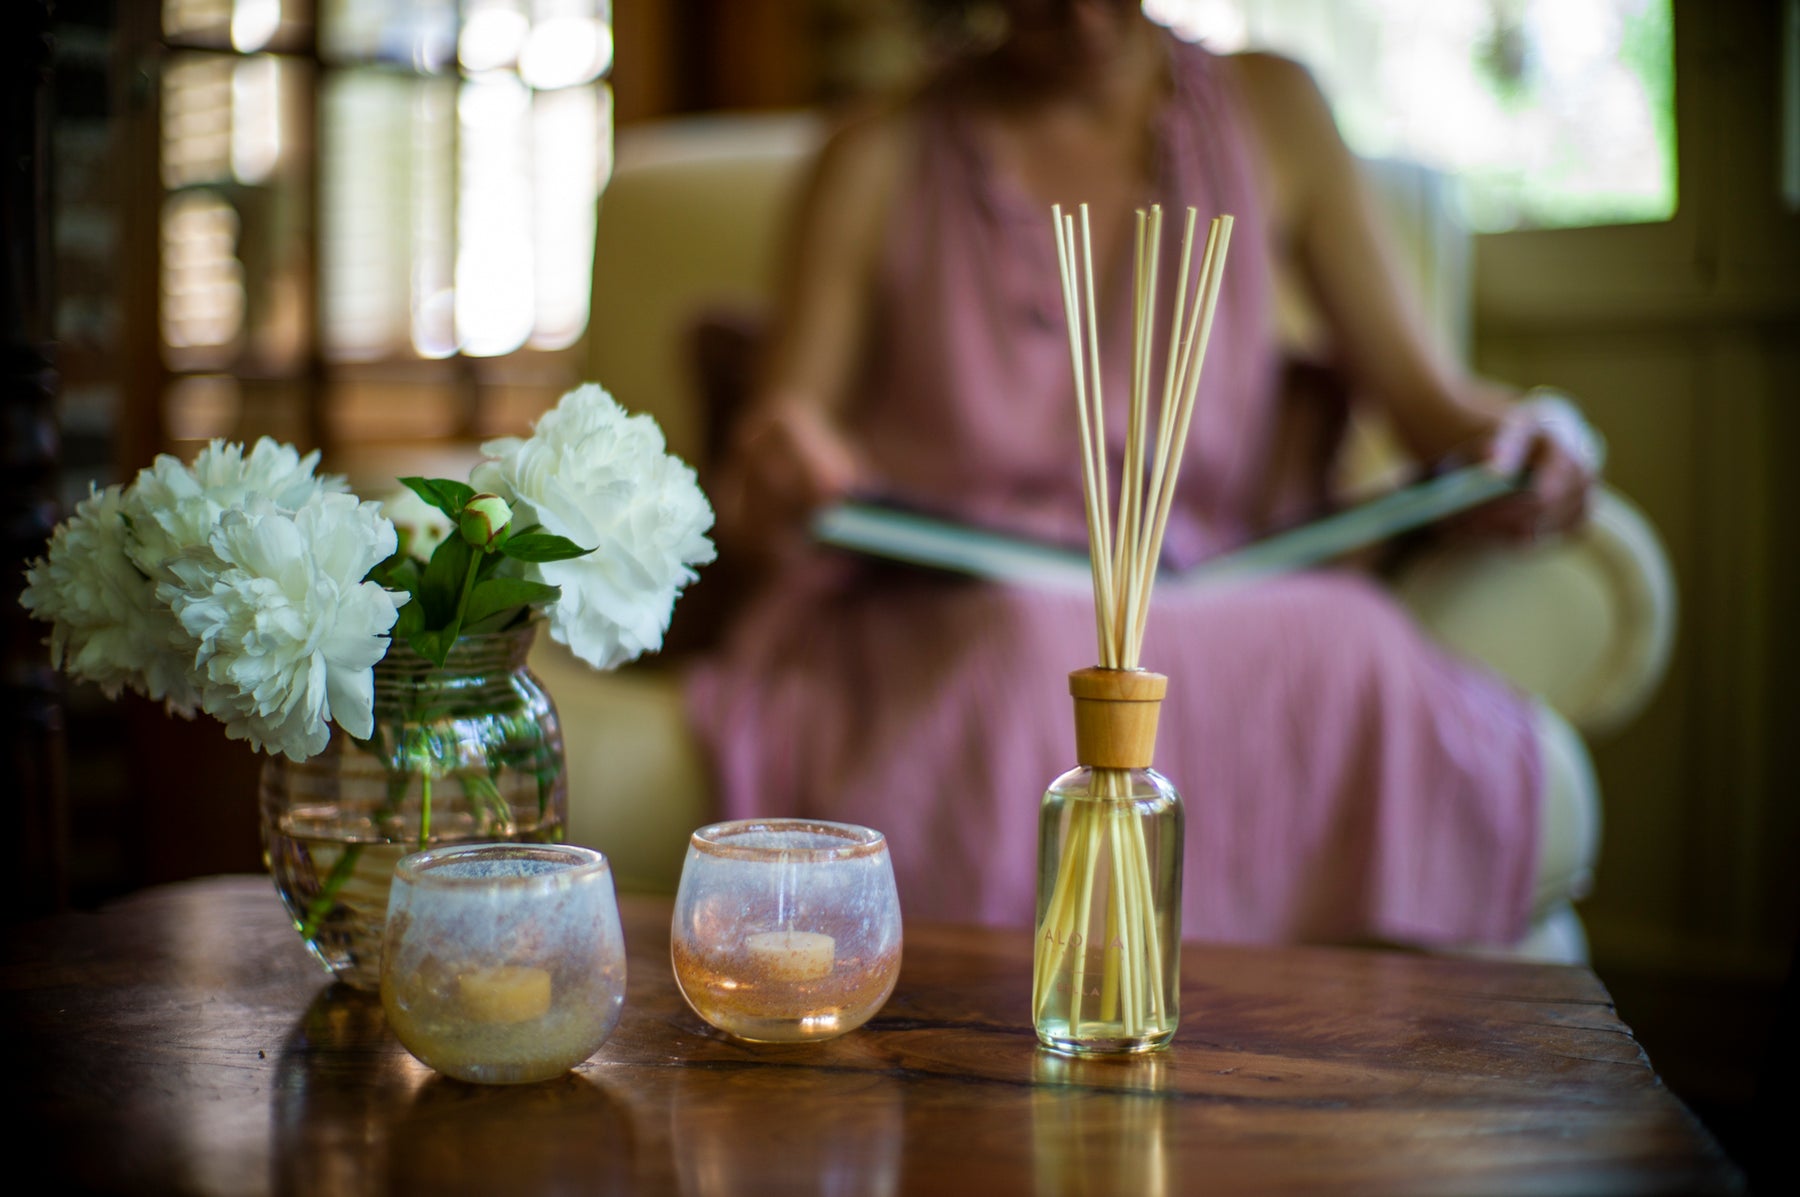 Woman sitting in pink dress reading by coffee table with a reed diffuser on the table.